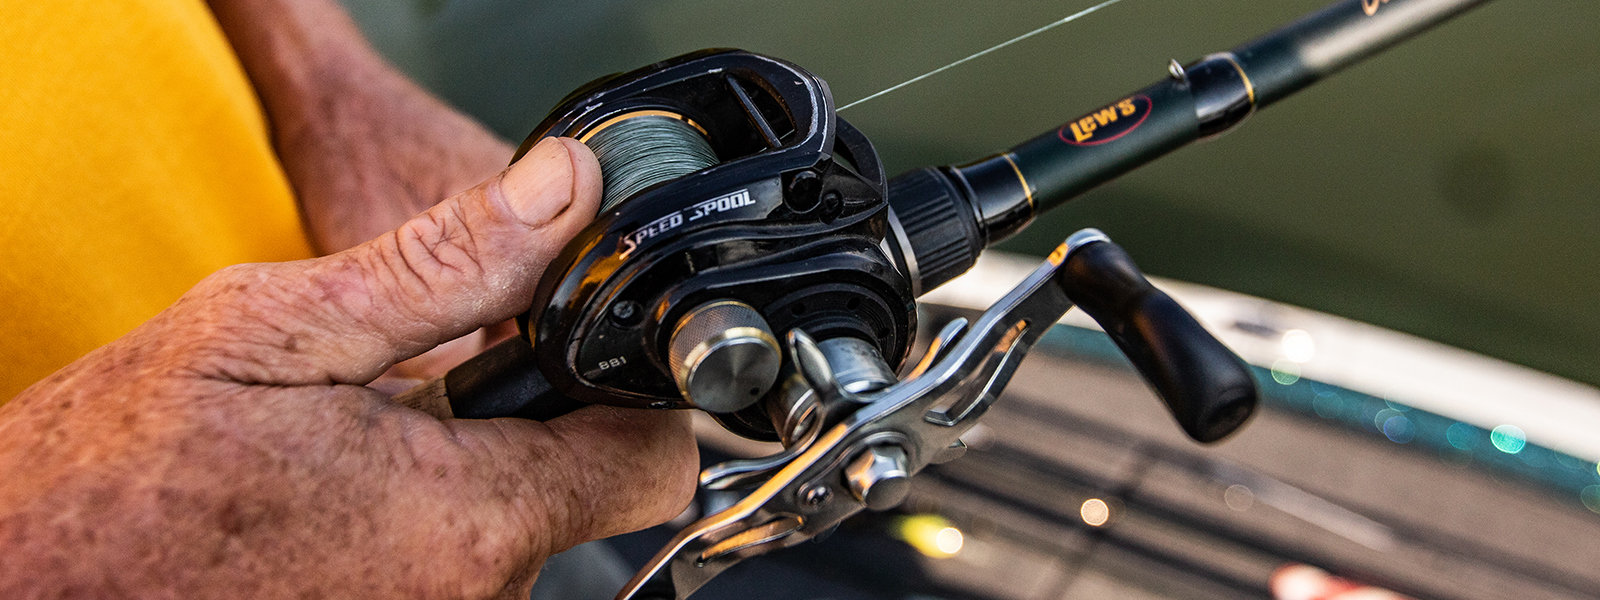 Know the differences in baitcast reels - Bassmaster